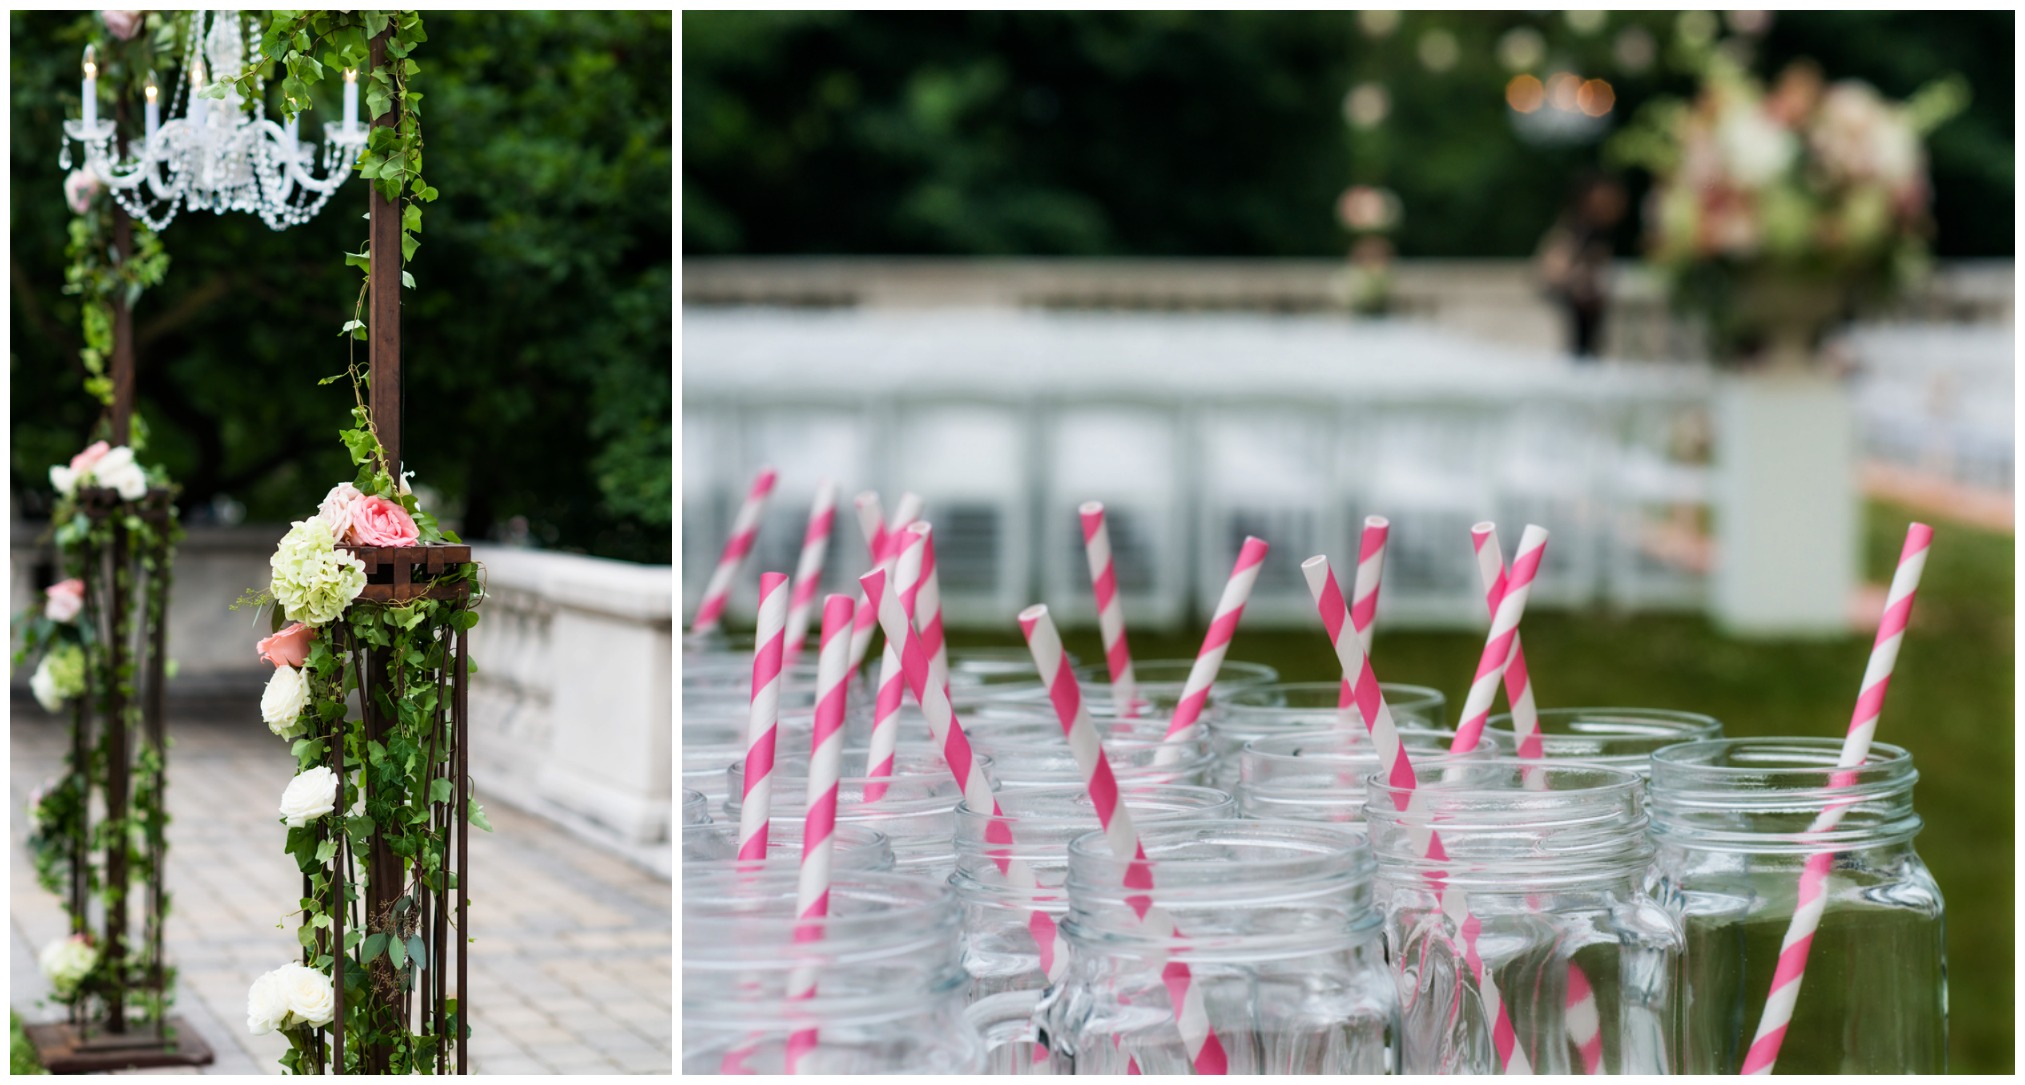 Outdoor wedding details at the Field Museum by HMR Designs